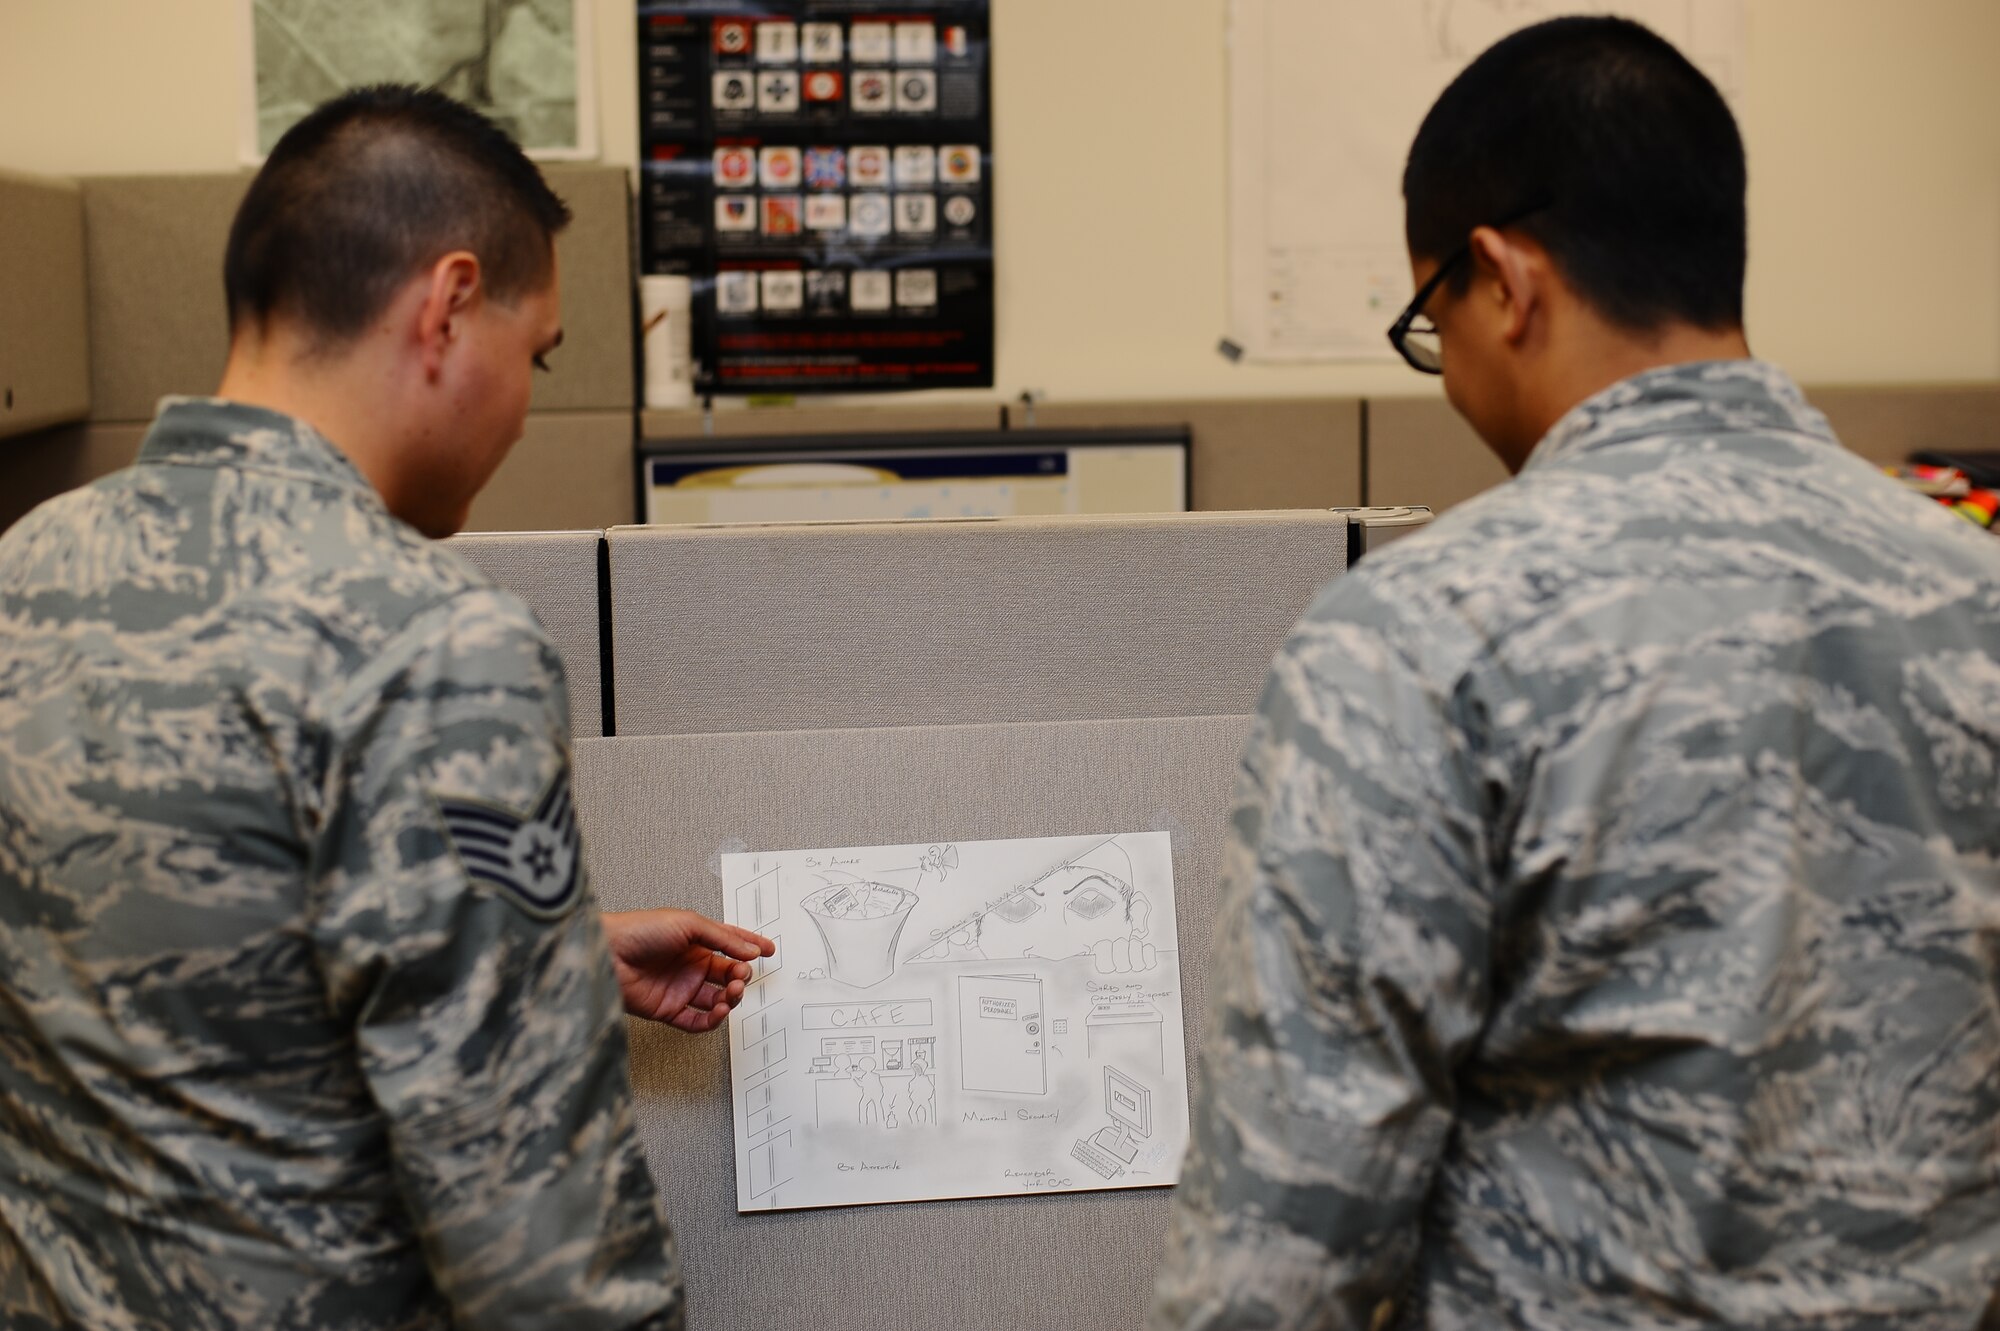 Airmen from the 460th Space Wing Plans and Programs office view the winning poster from the Operations Security poster contest on Buckley. The poster, submitted by Staff Sgt. Ashley Glasgow, 460th Security Forces Squadron supervisor, will go on to compete with other posters at Air Force Space Command. (U.S. Air Force photo by Senior Airman Darren Scott/Released)